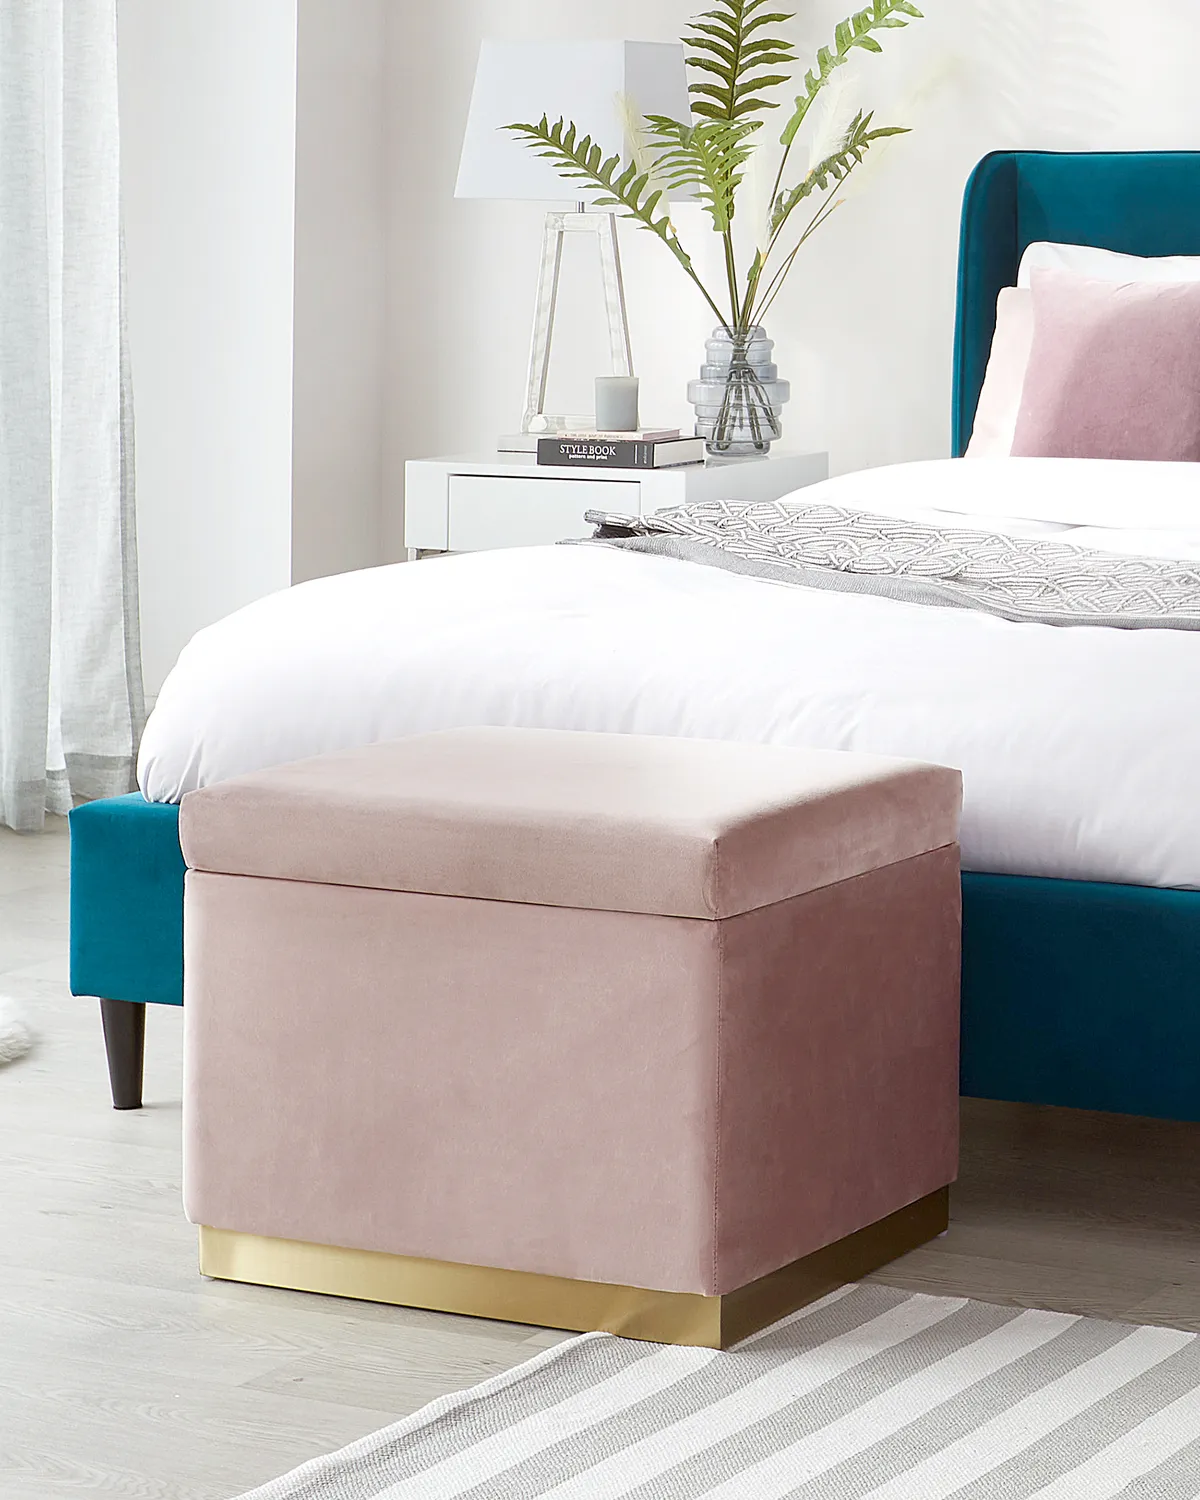 pink bedroom ideas - pair light pink with petrol blue 